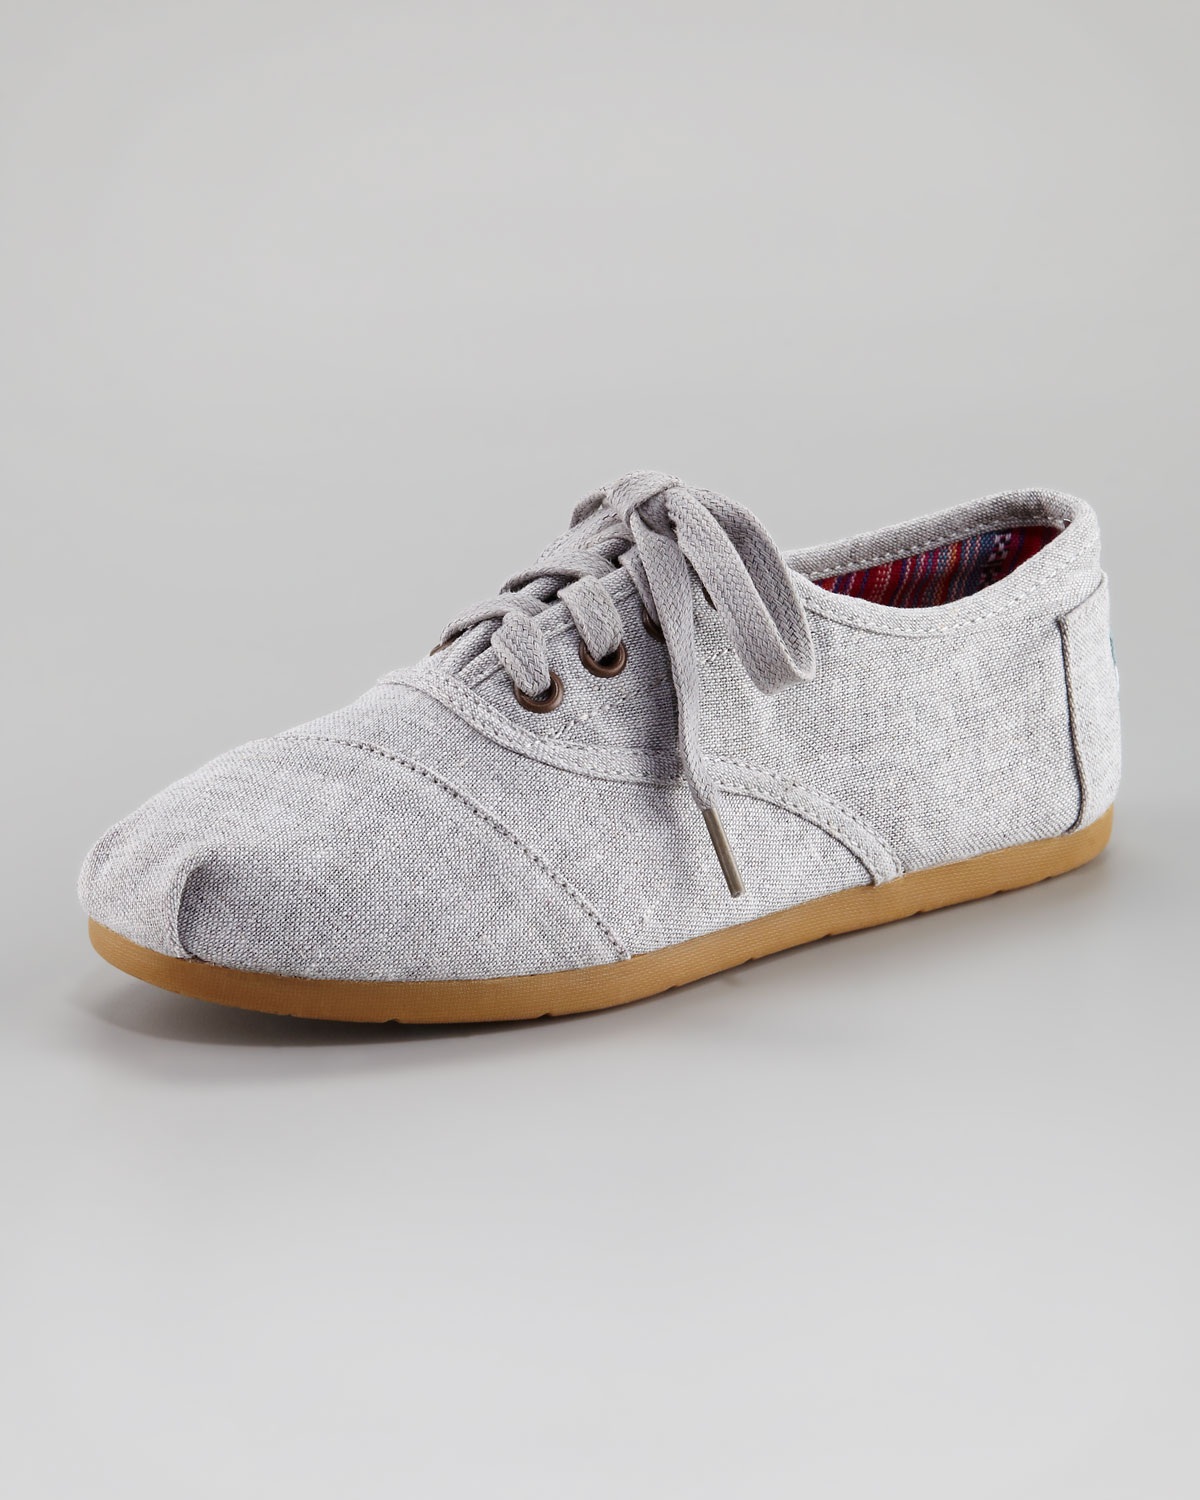 TOMS Fabric Laceup Shoe in Grey (Gray 